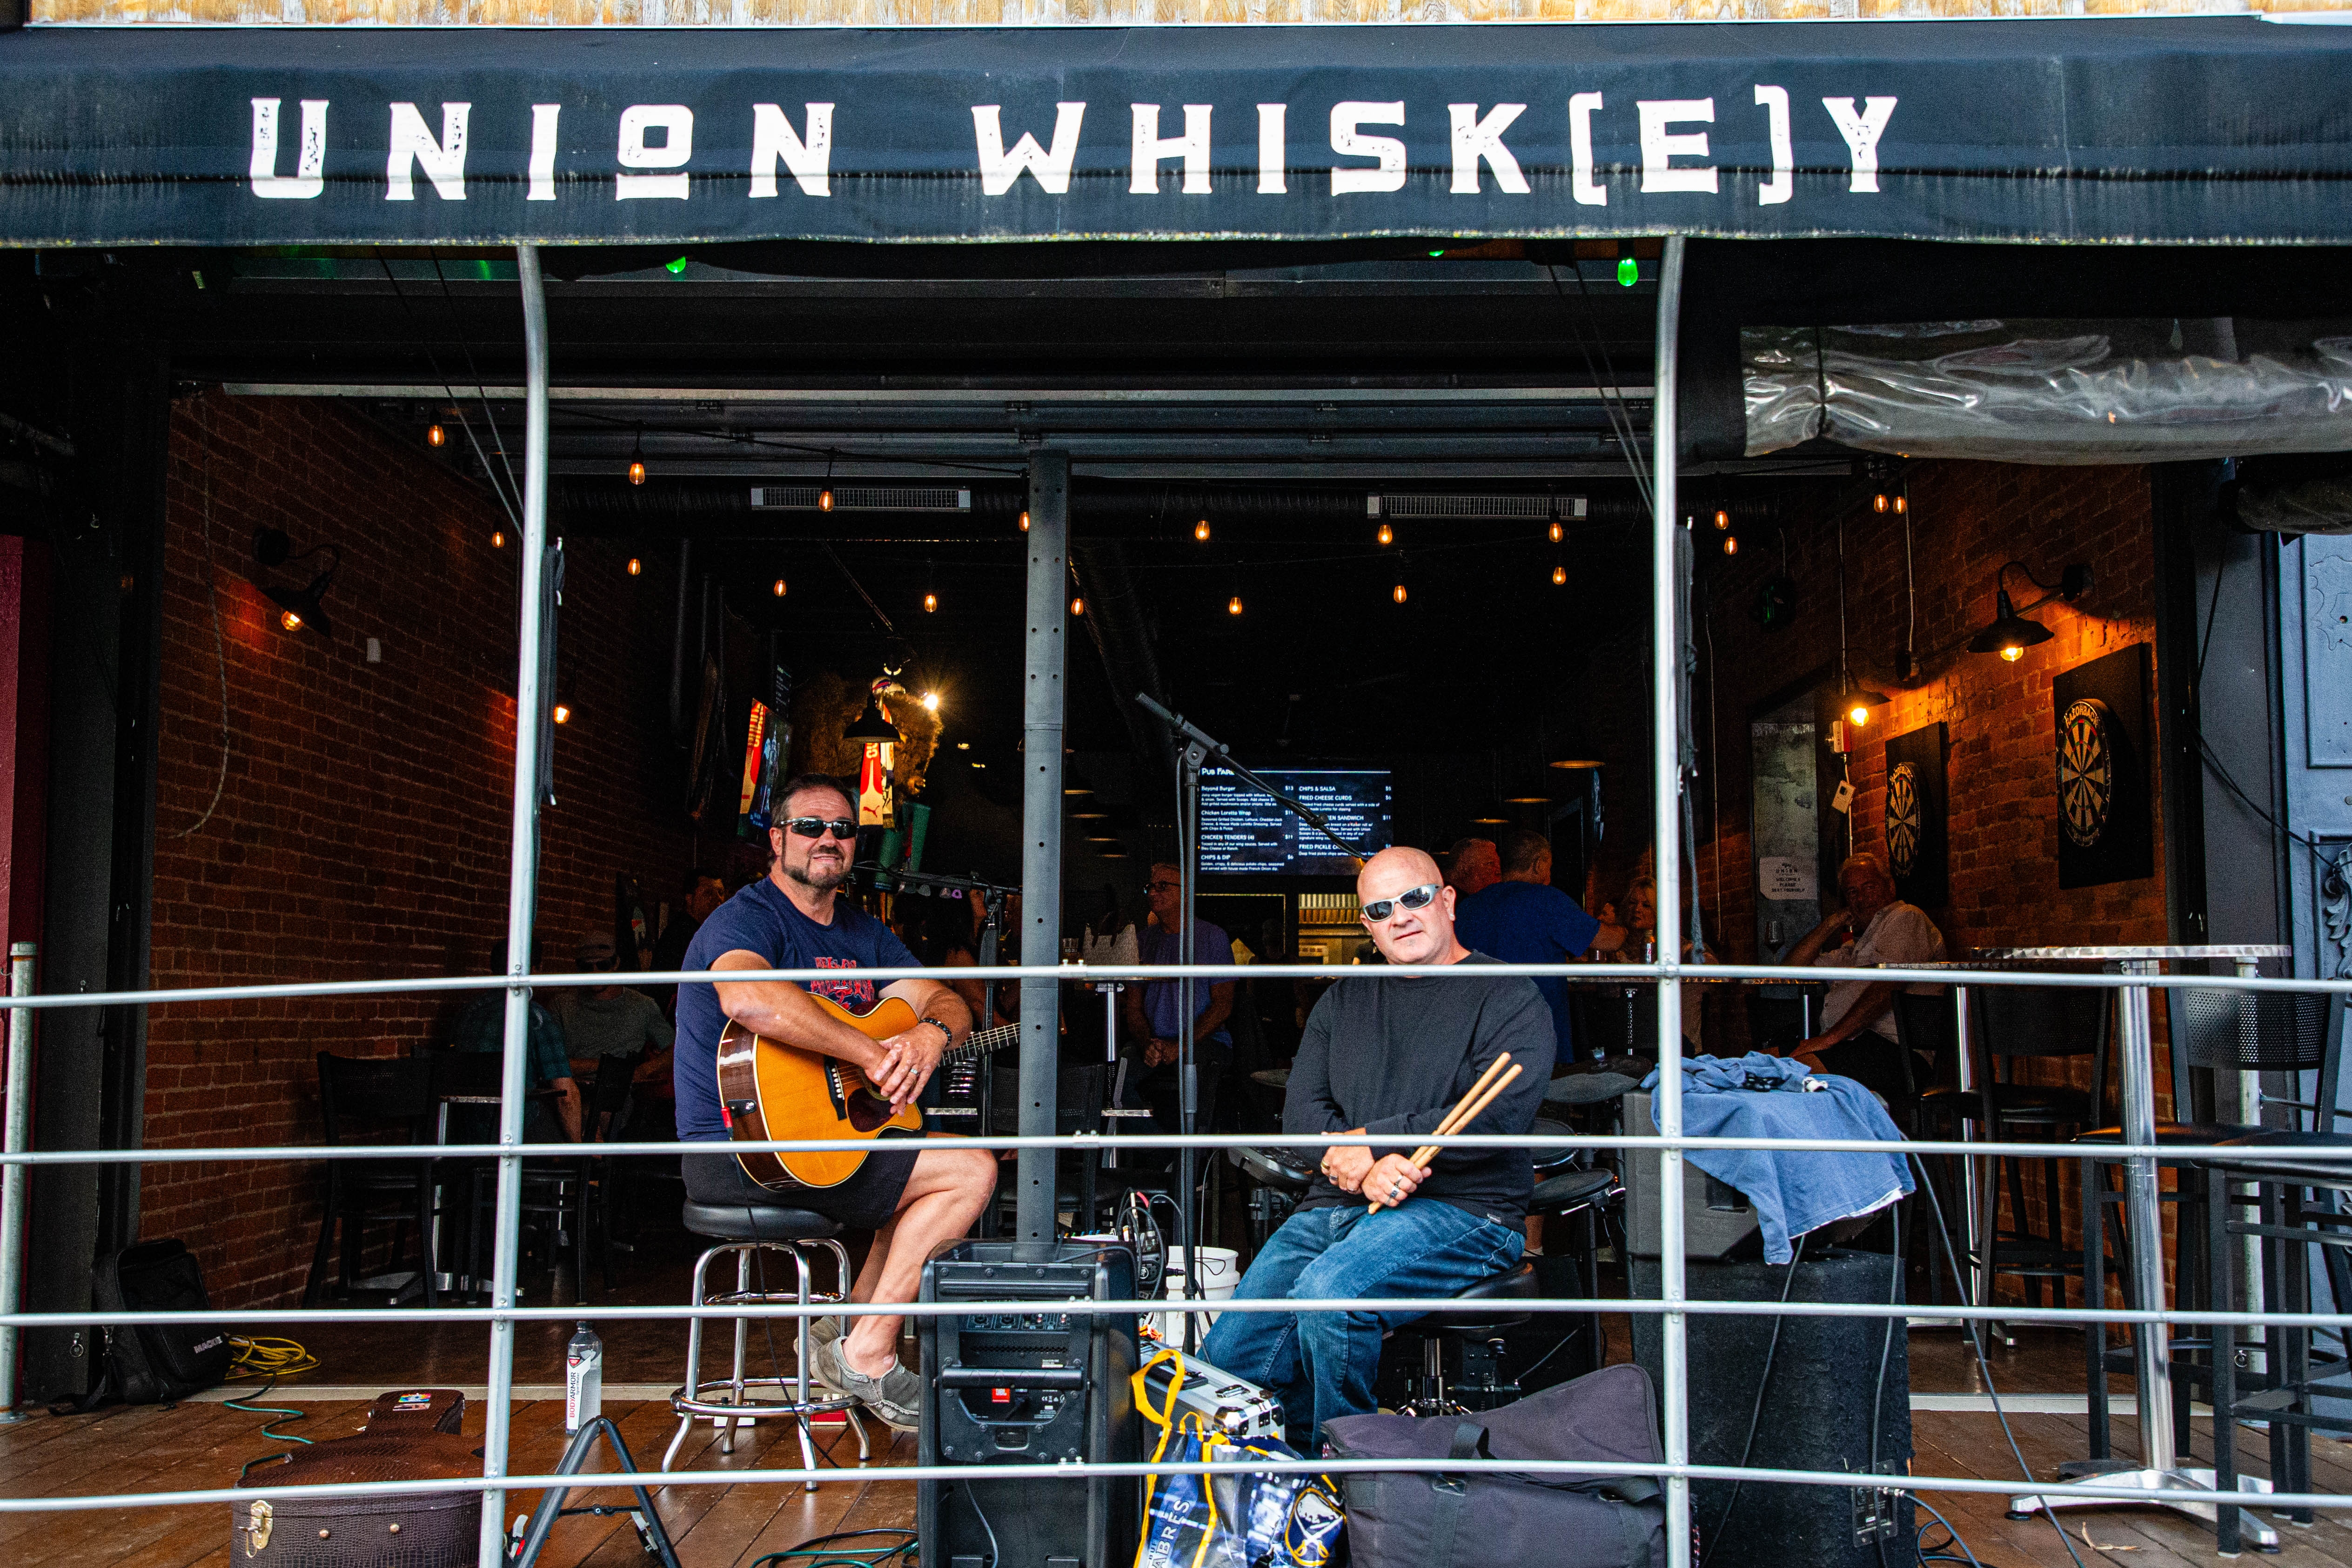 Musicians at Union Whiskey